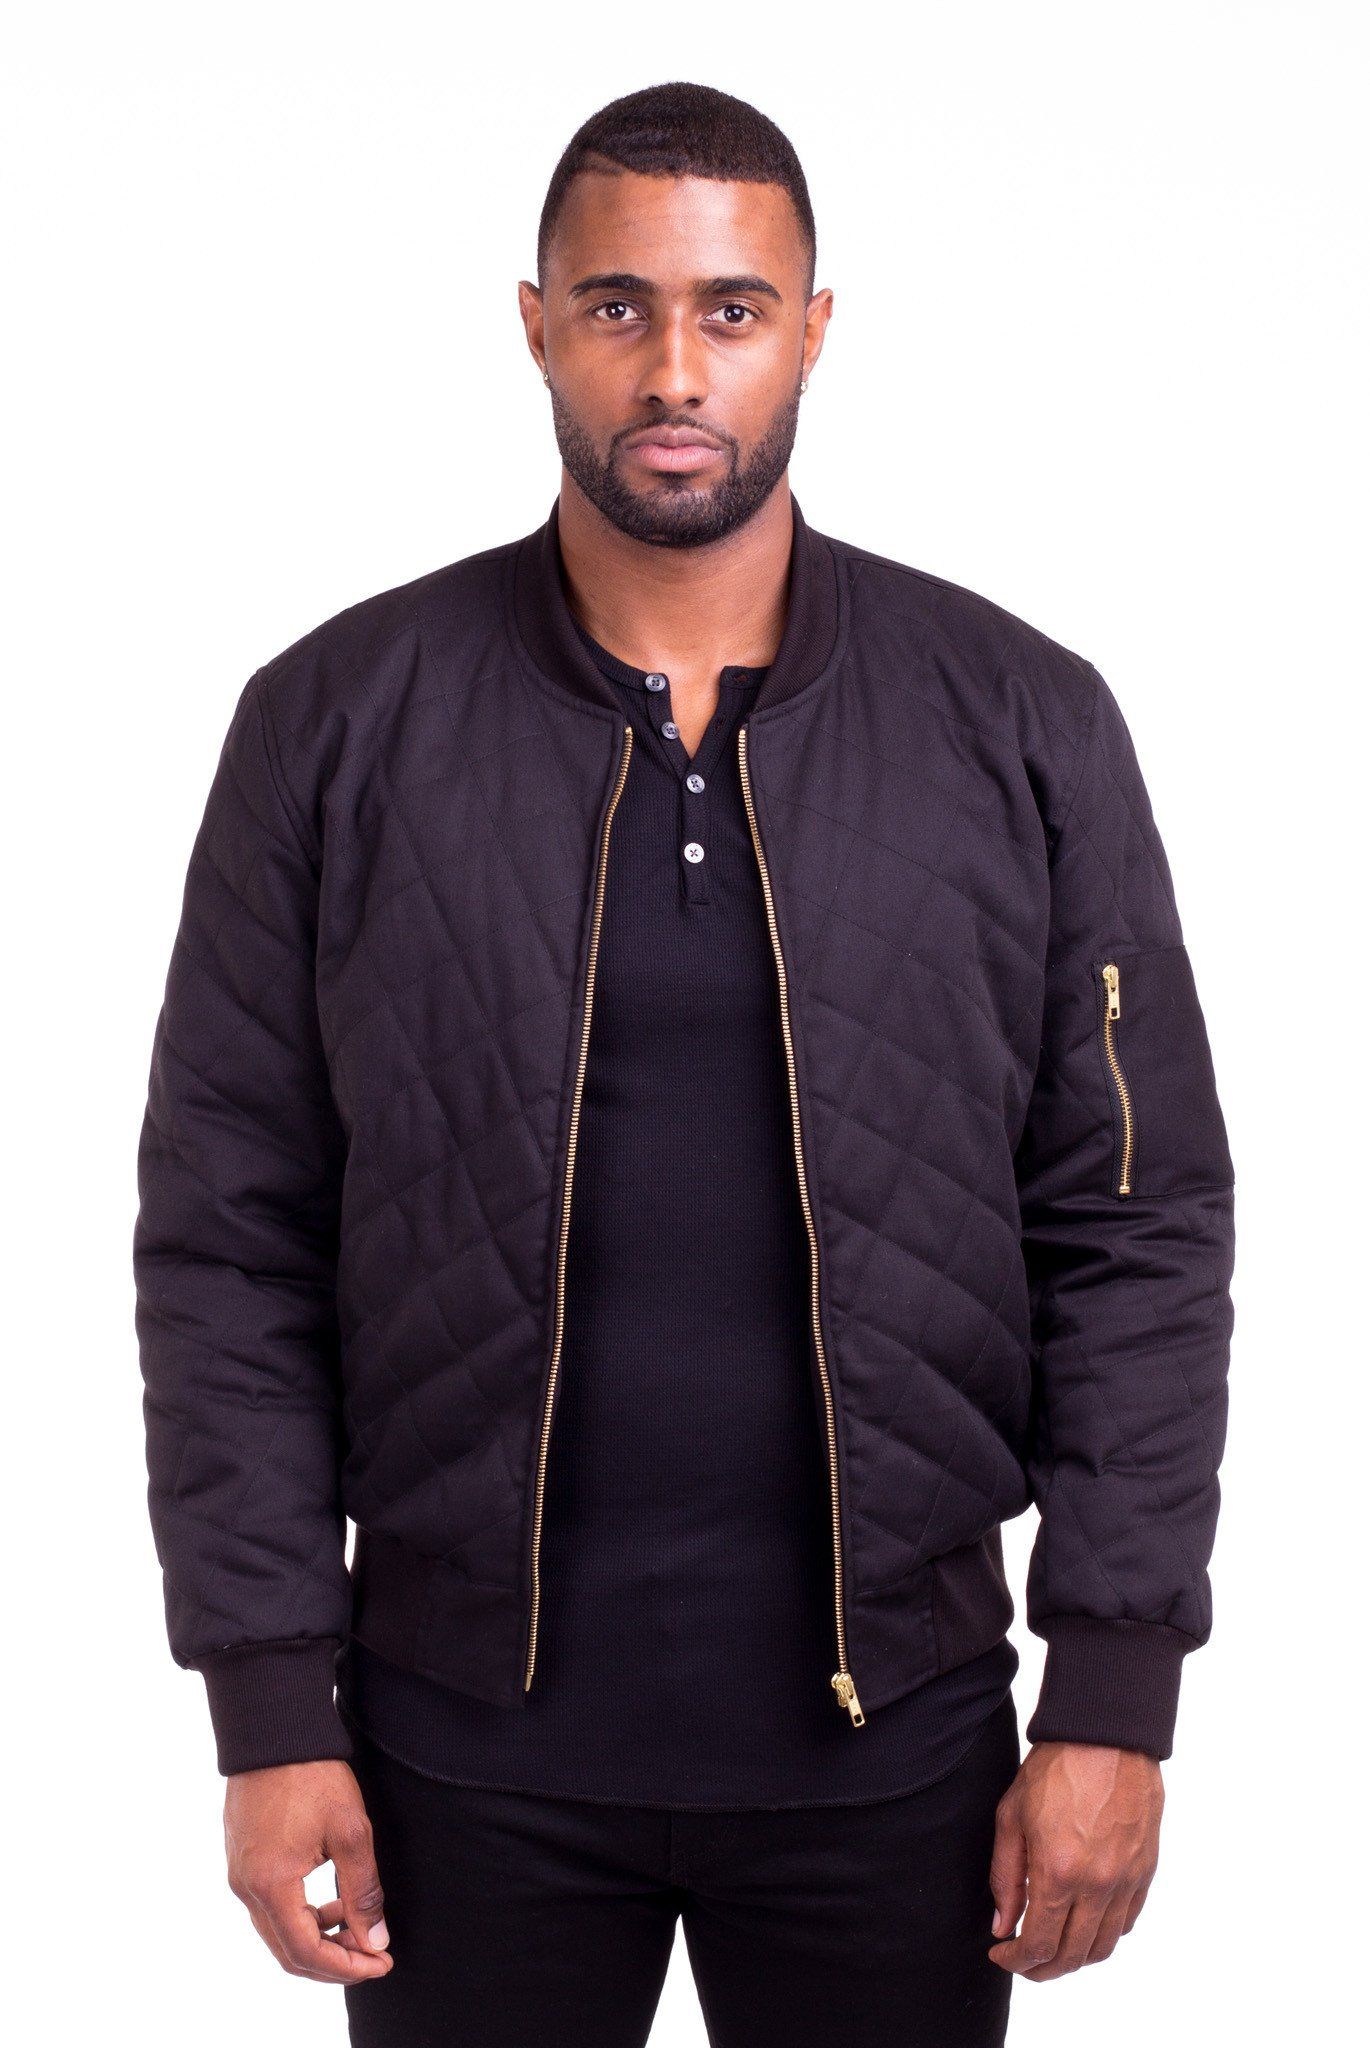 ACE BLACK QUILTED BOMBER JACKET | Poor Little Rich Boy Clothing